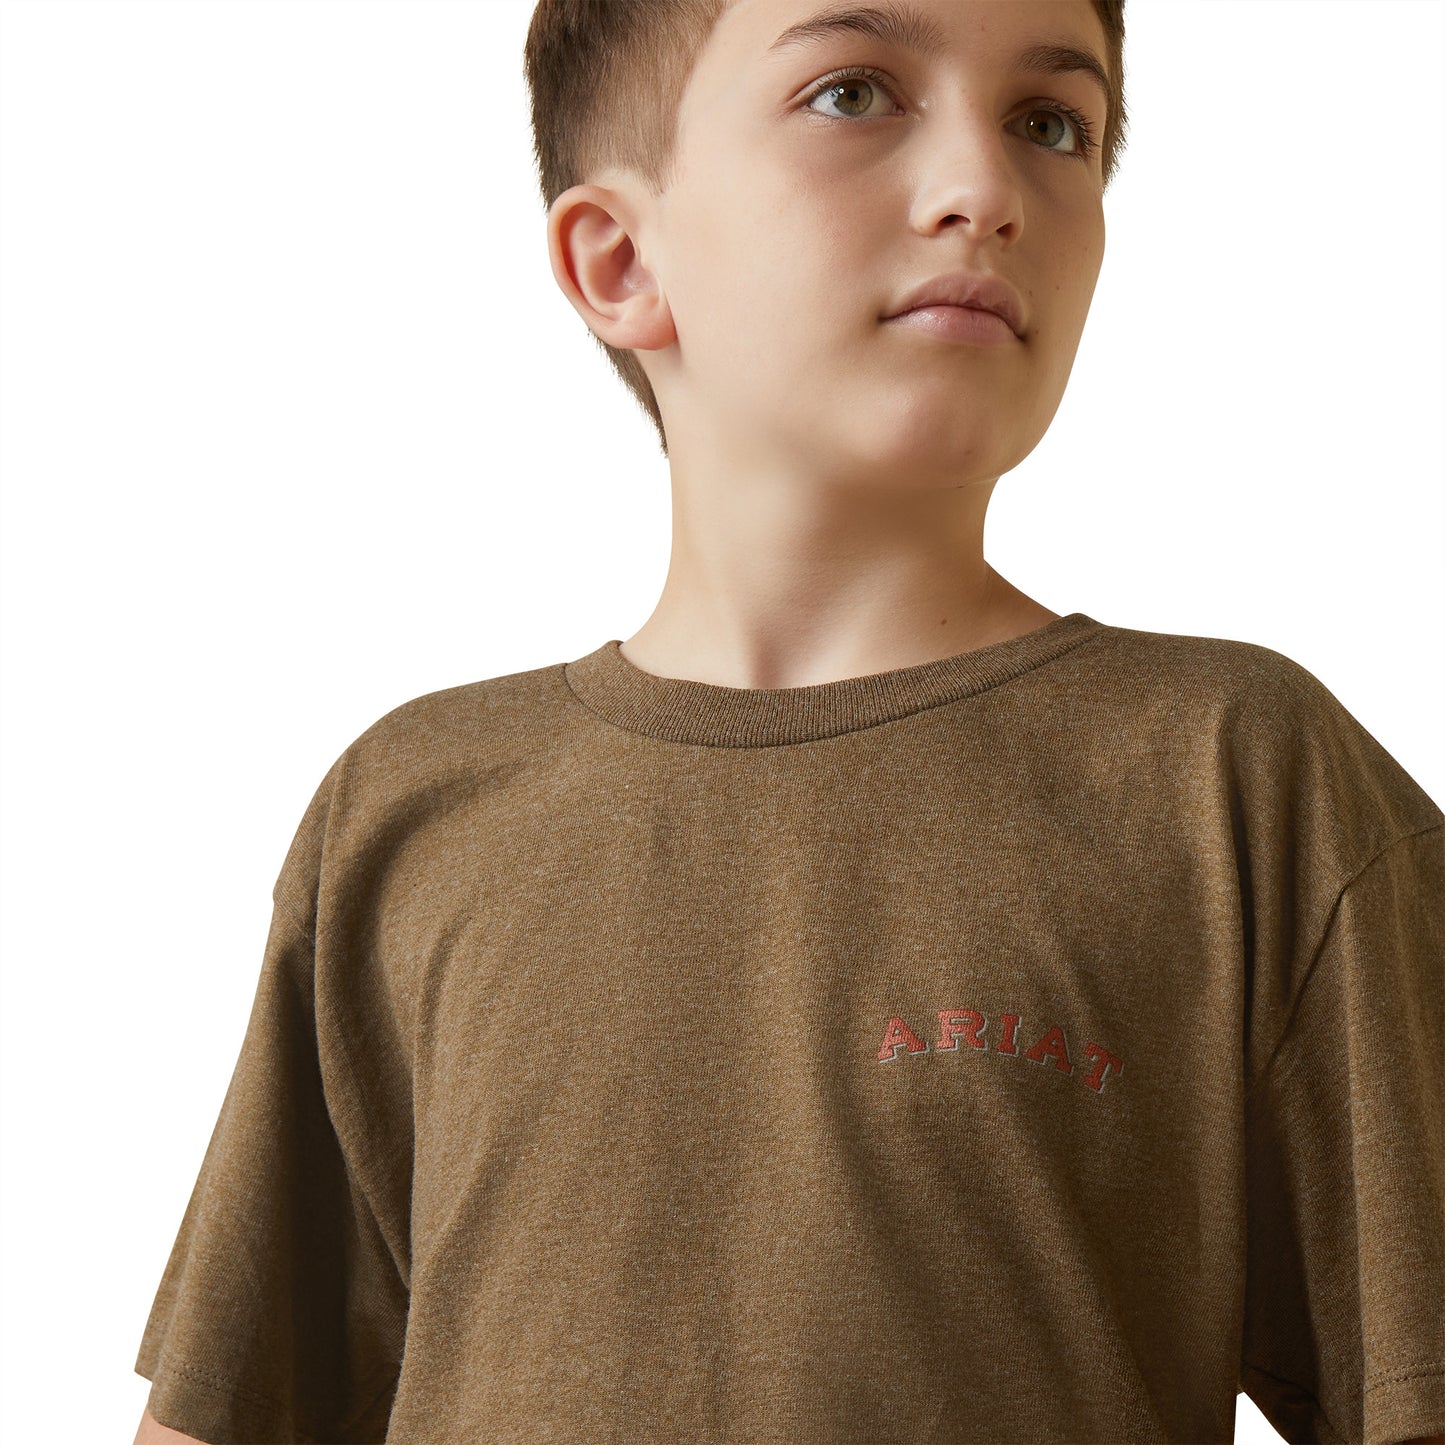 Ariat® Youth Boy's Farm Truck Brown Graphic T-Shirt 10044751